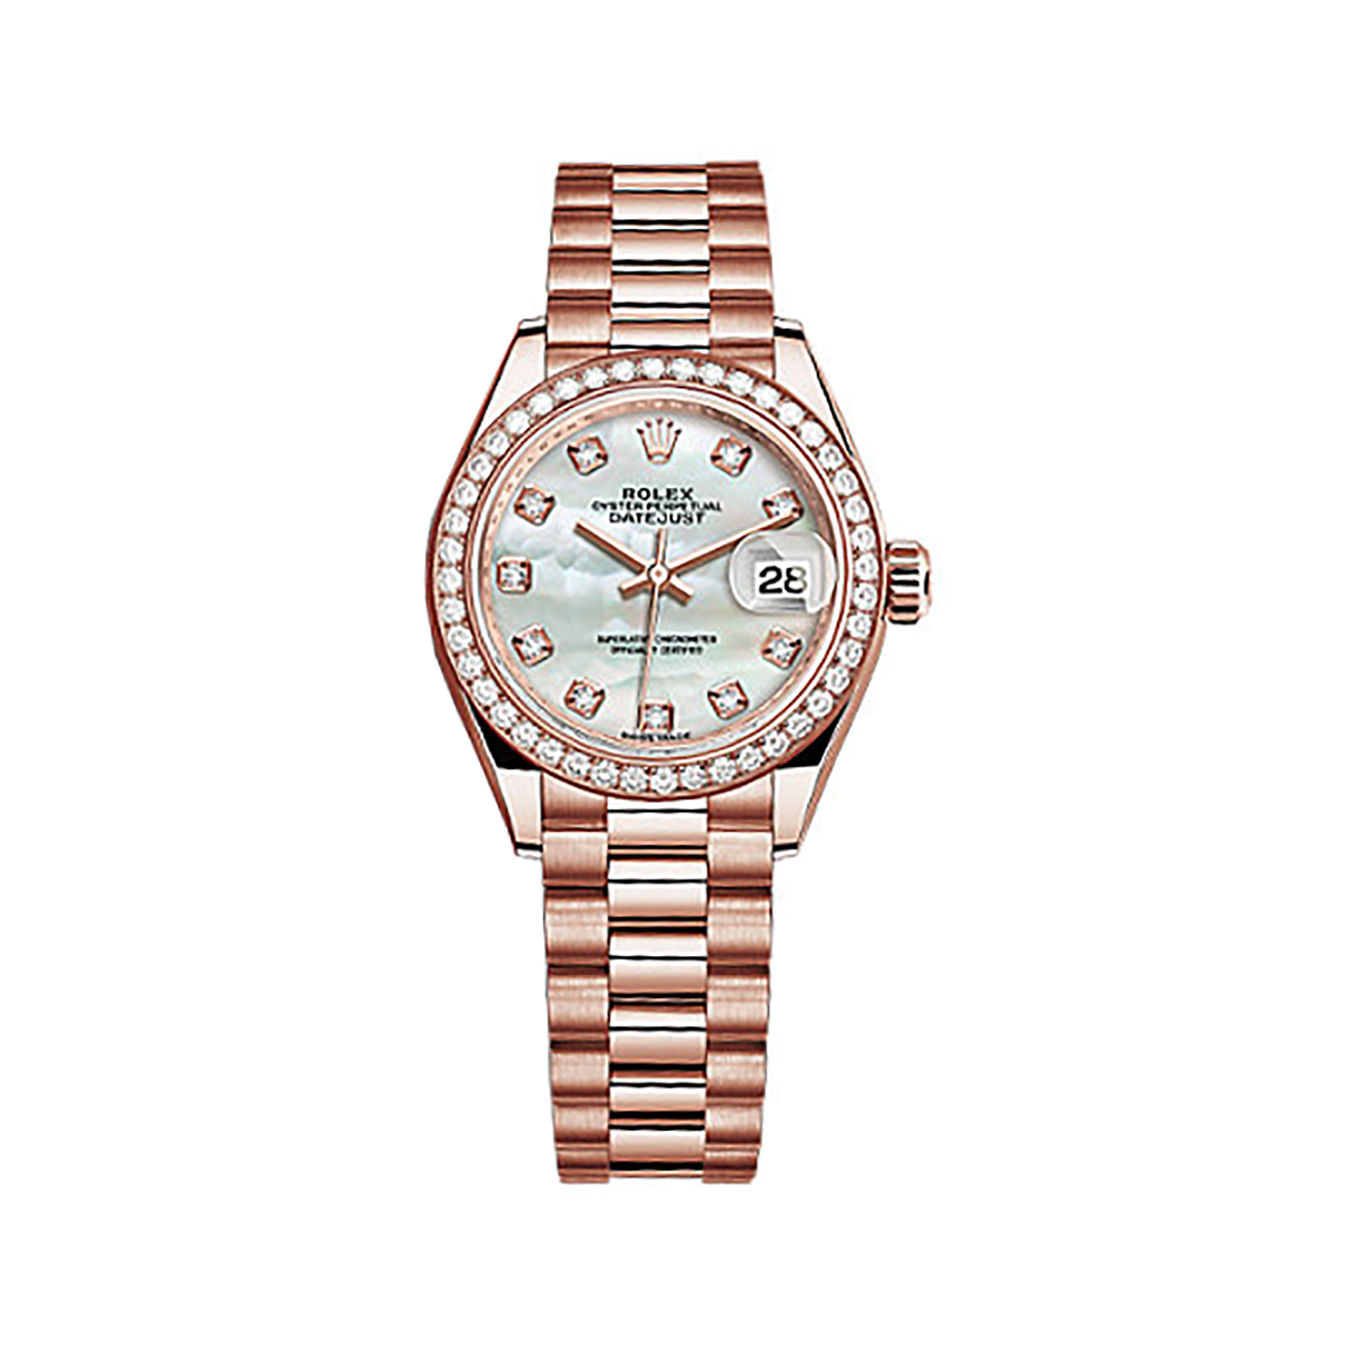 Lady-Datejust 28 279135RBR Rose Gold & Diamonds Watch (White Mother-of-pearl Set with Diamonds)